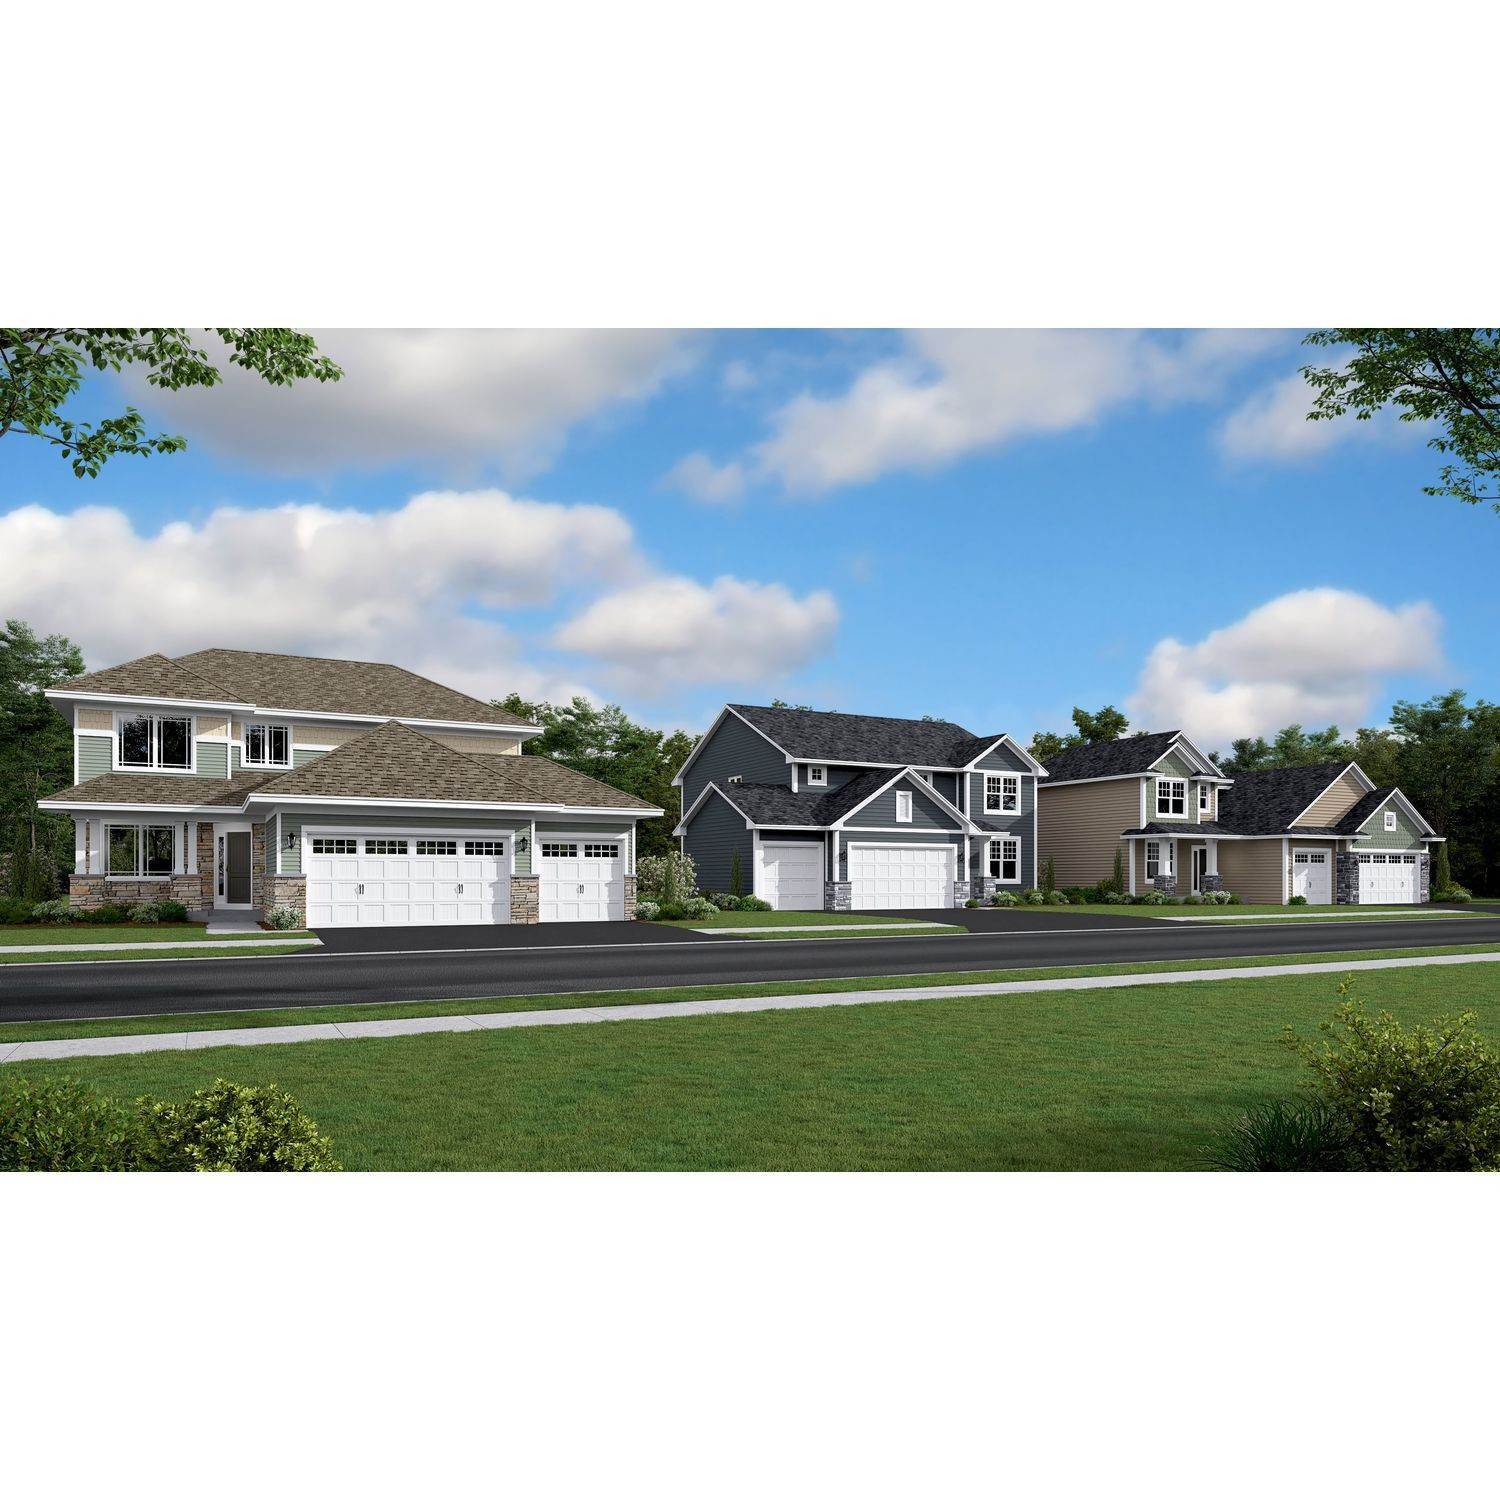 5. River Pointe - The Meadows of River Pointe Gebäude bei 17754 54th St NE, Otsego, MN 55374